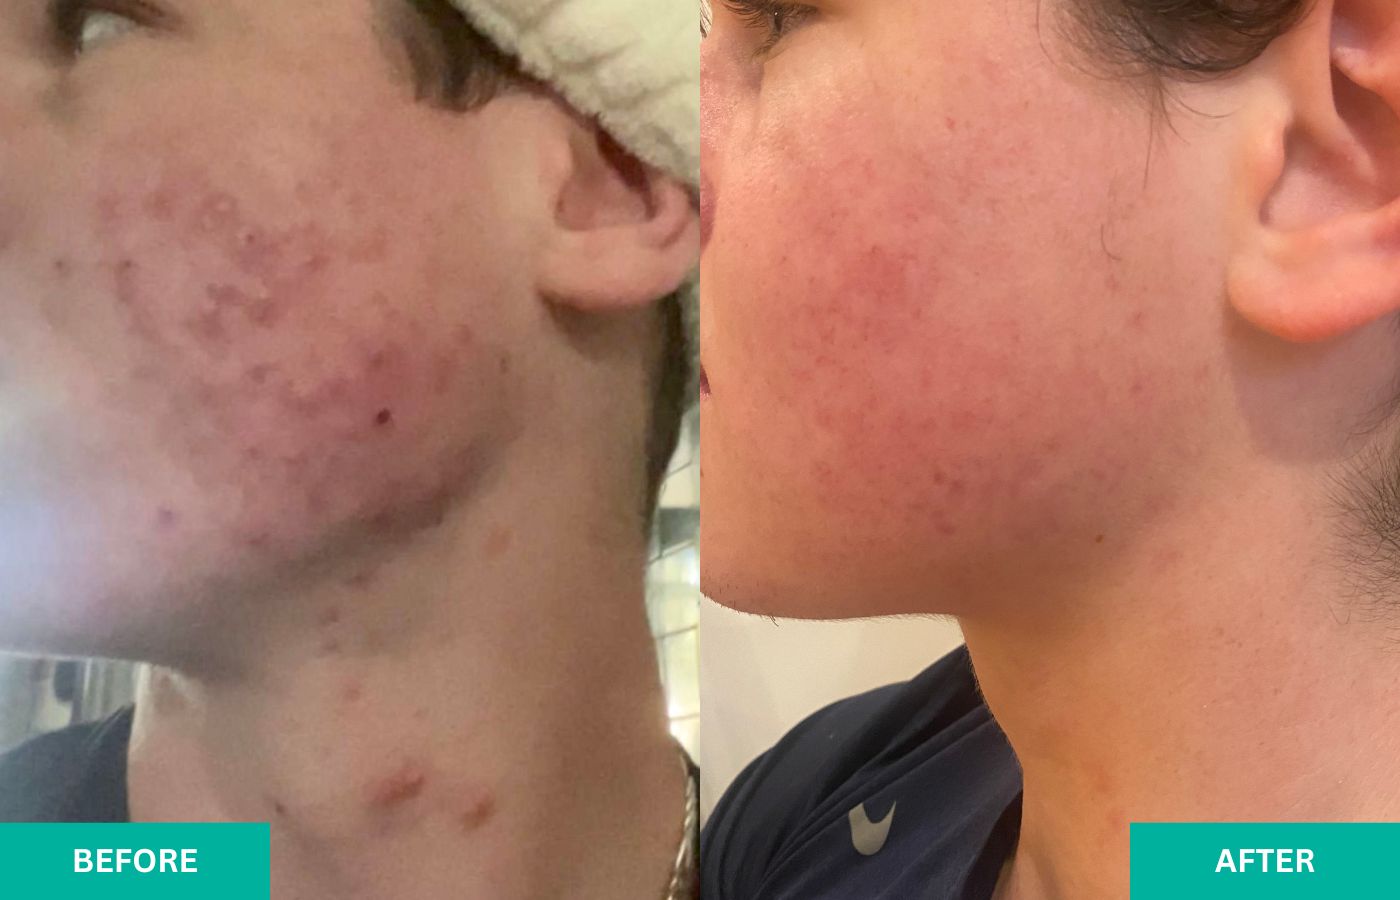 Teen Boy with severe acne at VERABELLA